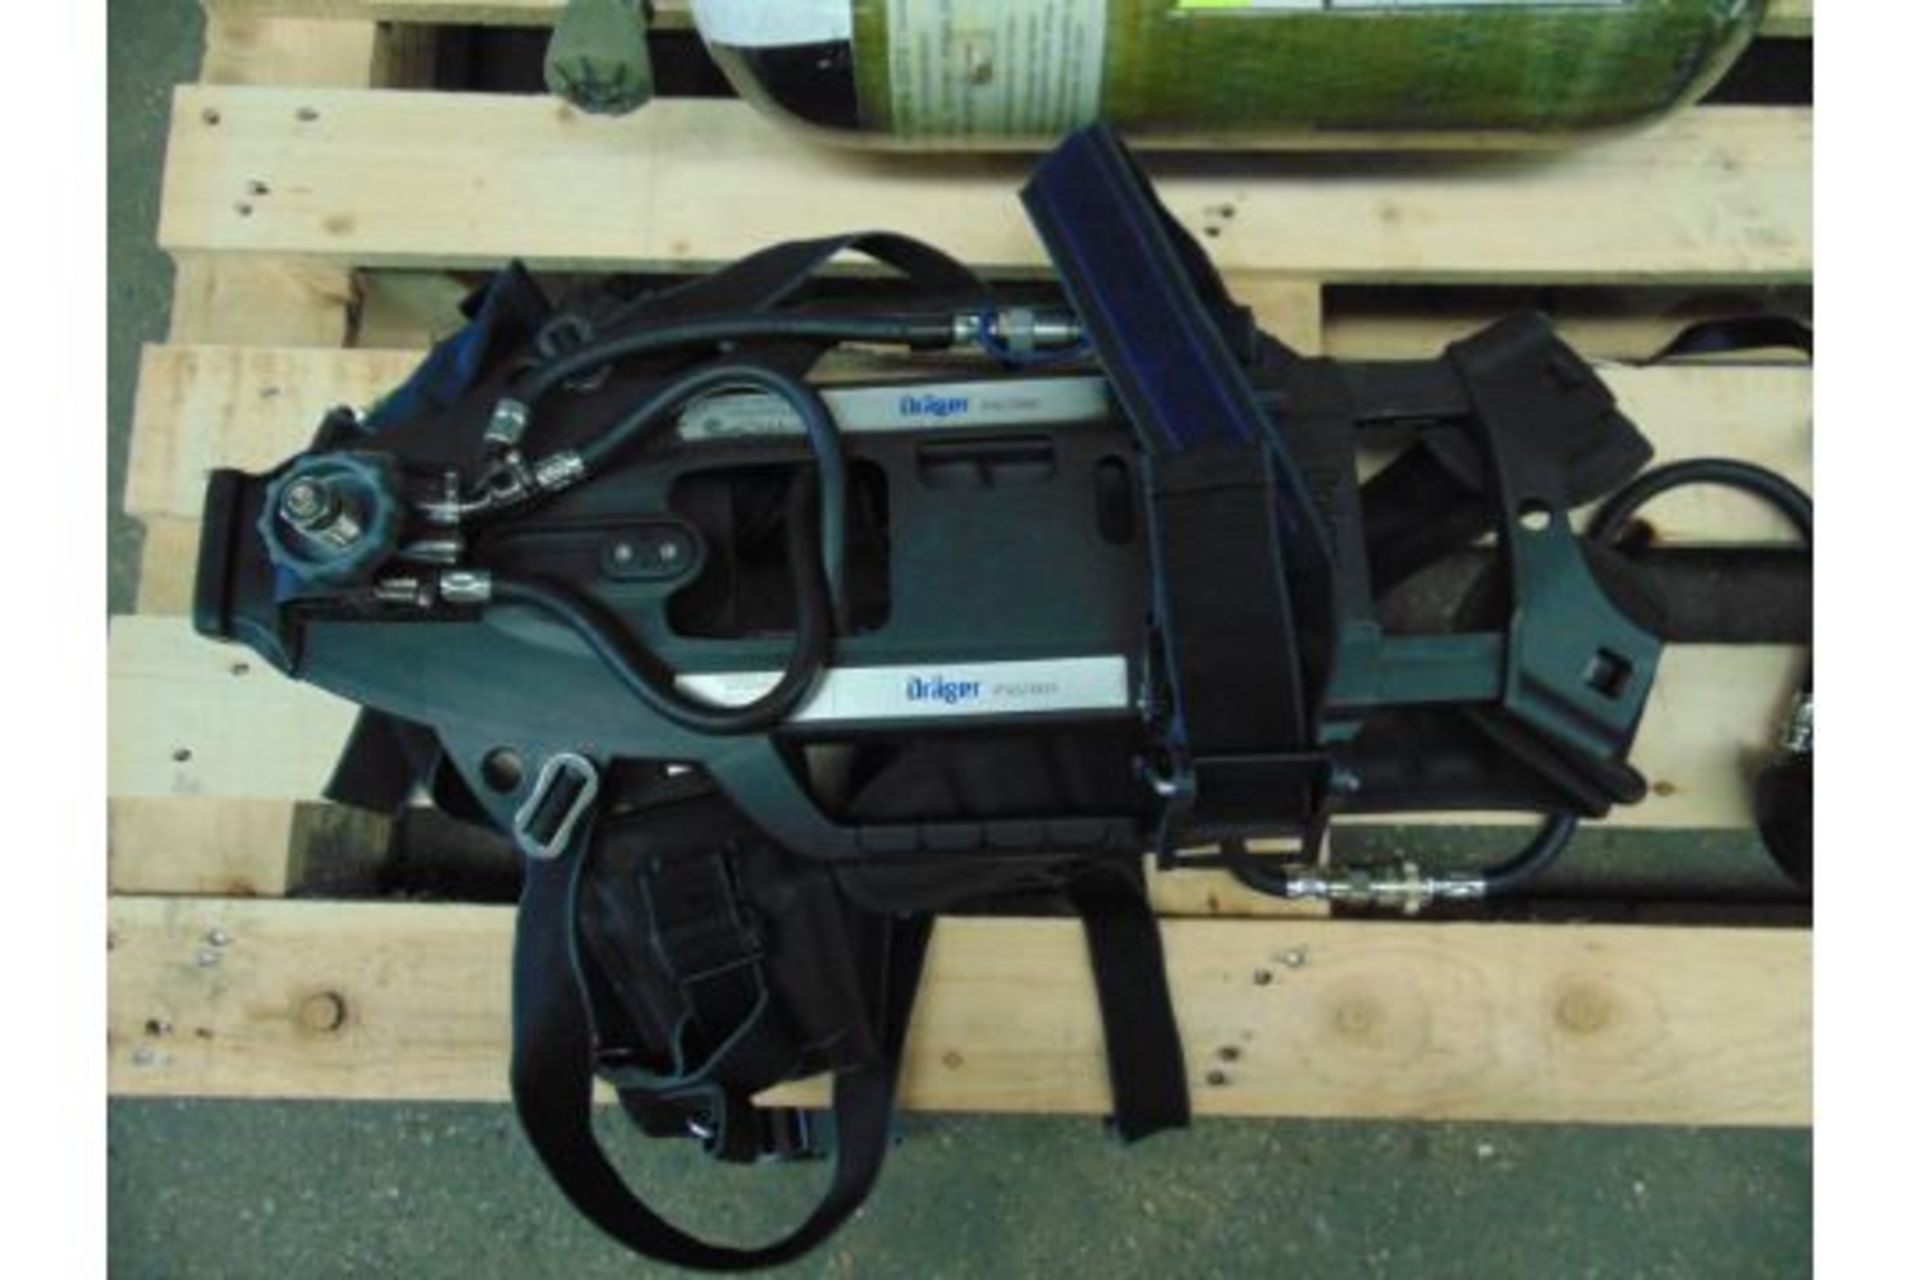 5 x Drager PSS 7000 Self Contained Breathing Apparatus w/ 10 x Drager 300 Bar Air Cylinders - Image 11 of 20